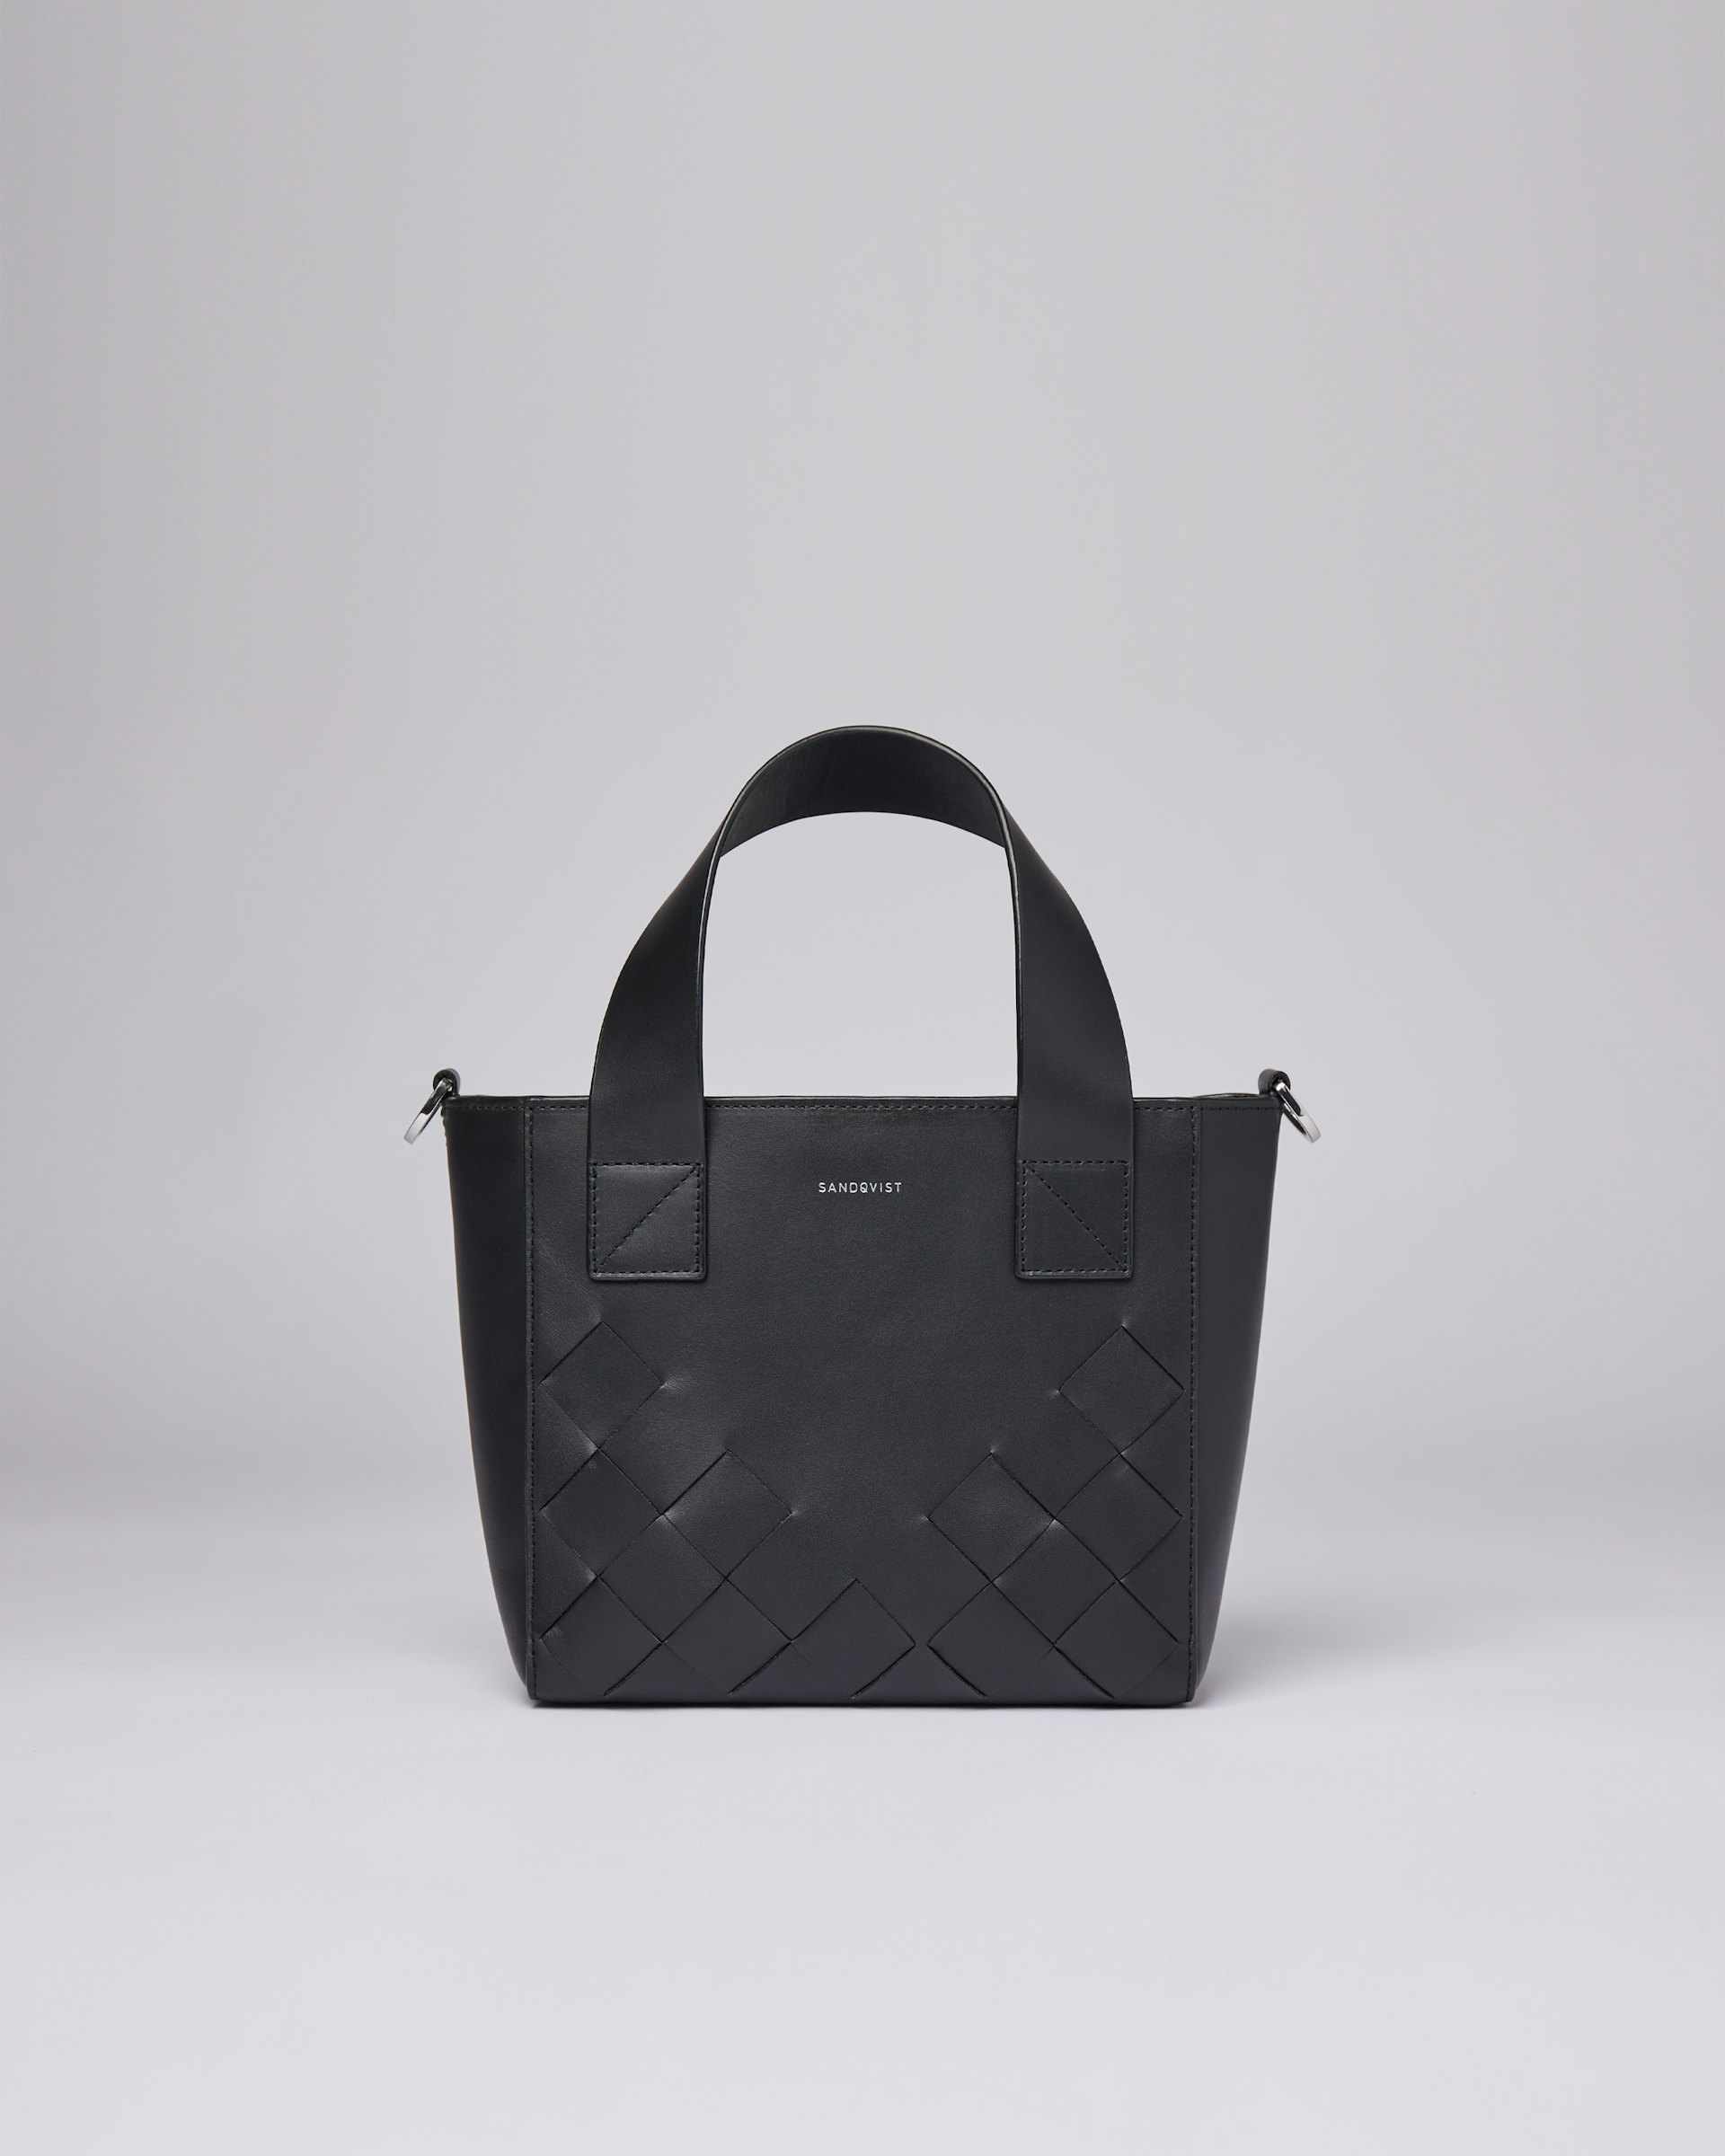 Cecilia weave belongs to the category Schultertaschen and is in color black